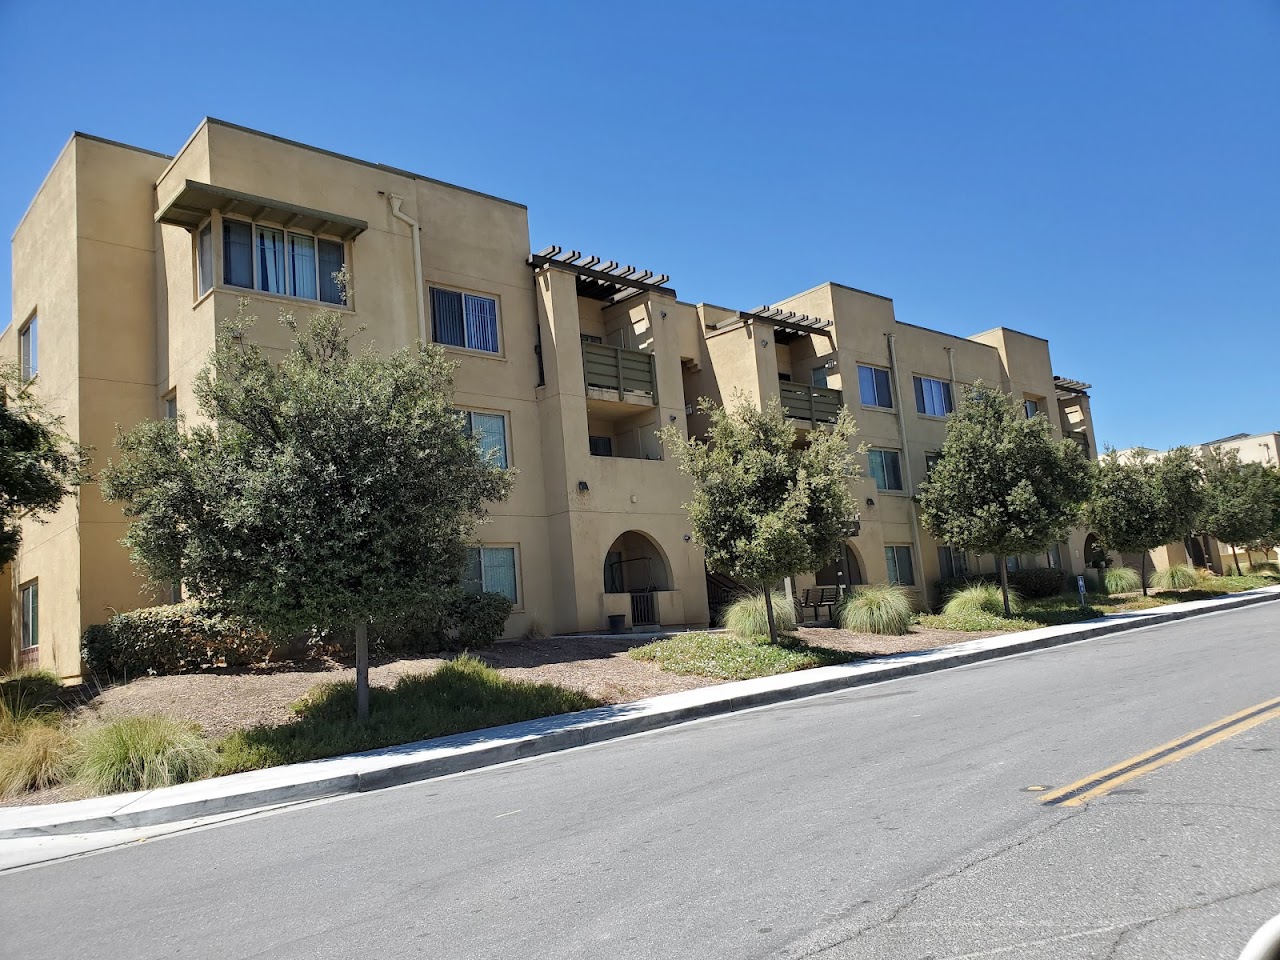 Photo of POTTERY COURT. Affordable housing located at 295 W SUMNER AVE LAKE ELSINORE, CA 92530